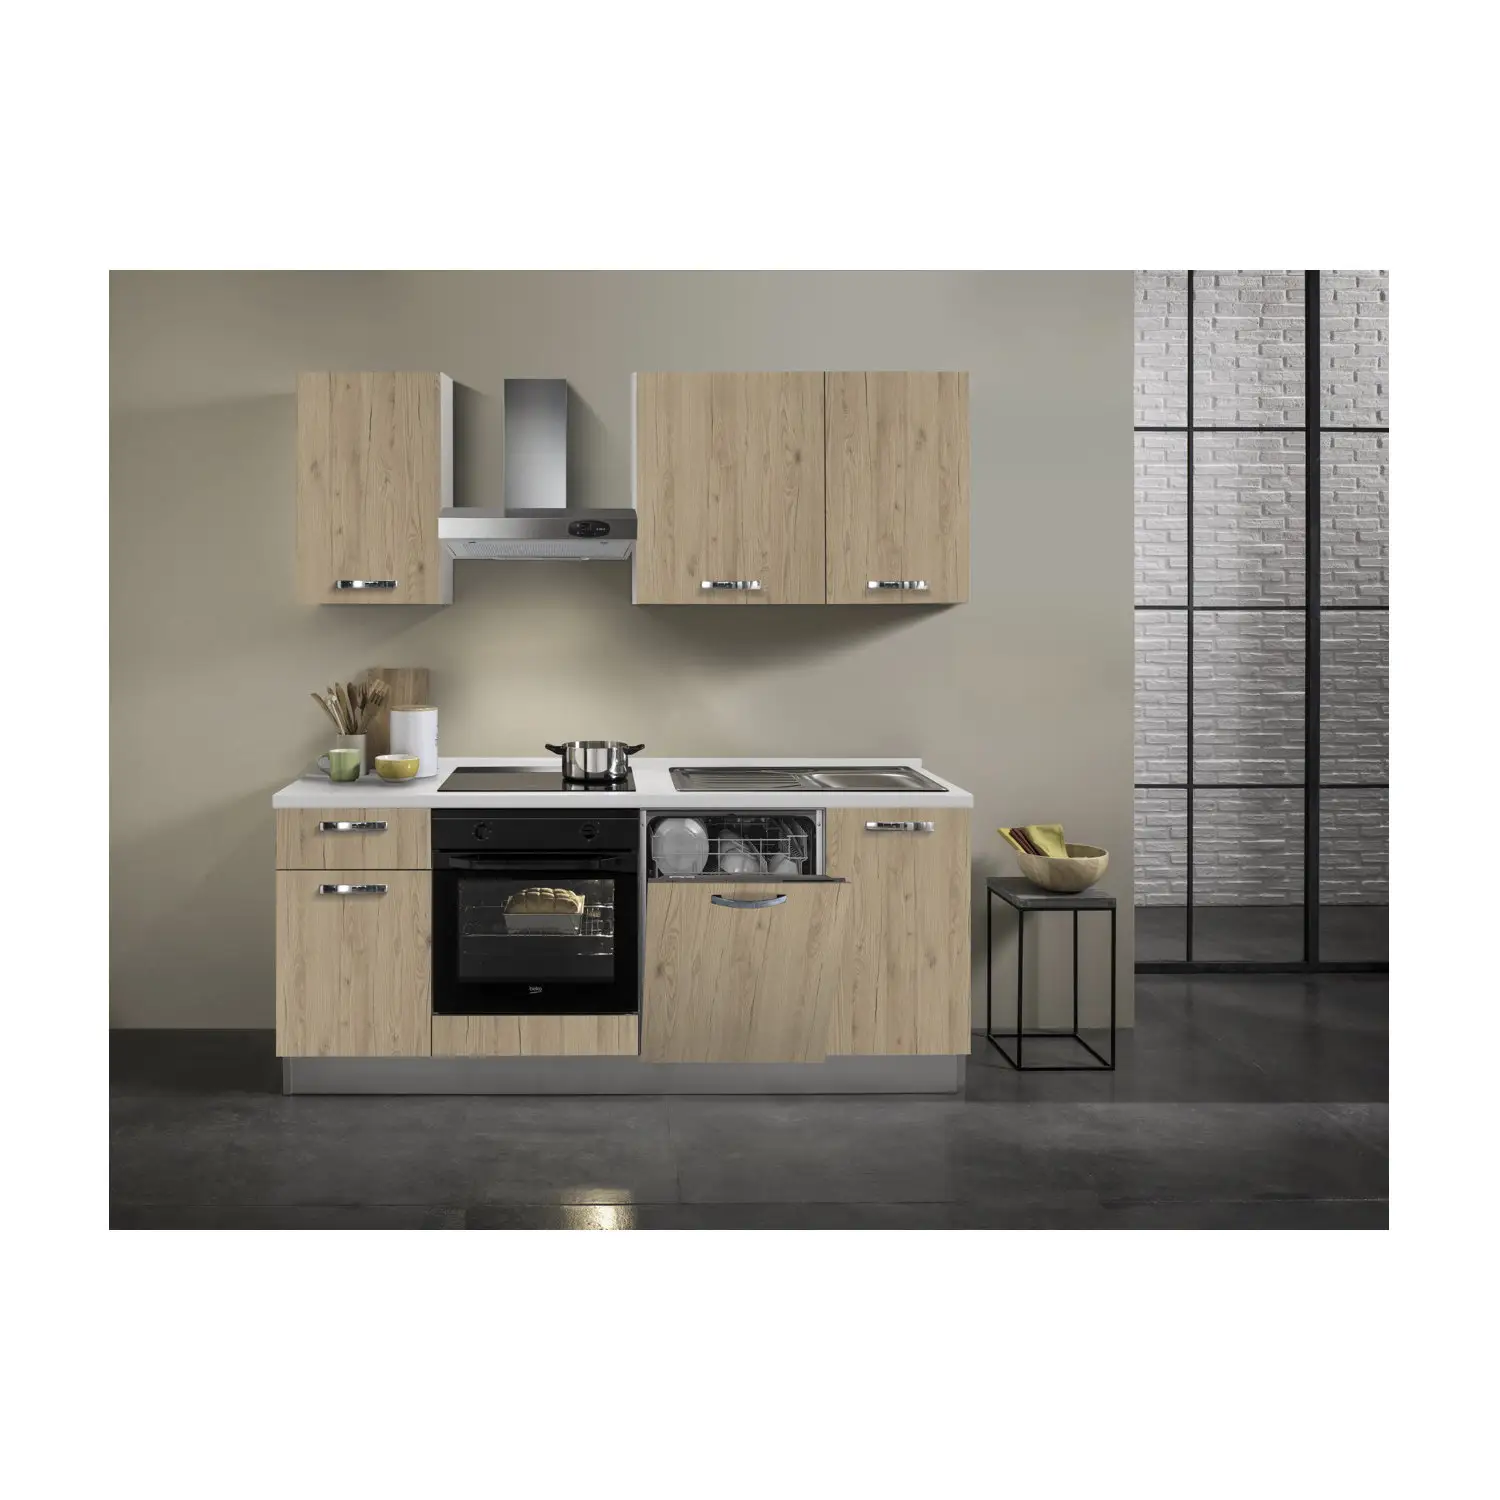 Top Supplier Pre Assembled Fitted Kitchen Furniture - Worktop Appliances Dishwasher Included - Efficiency Meets Aesthetics